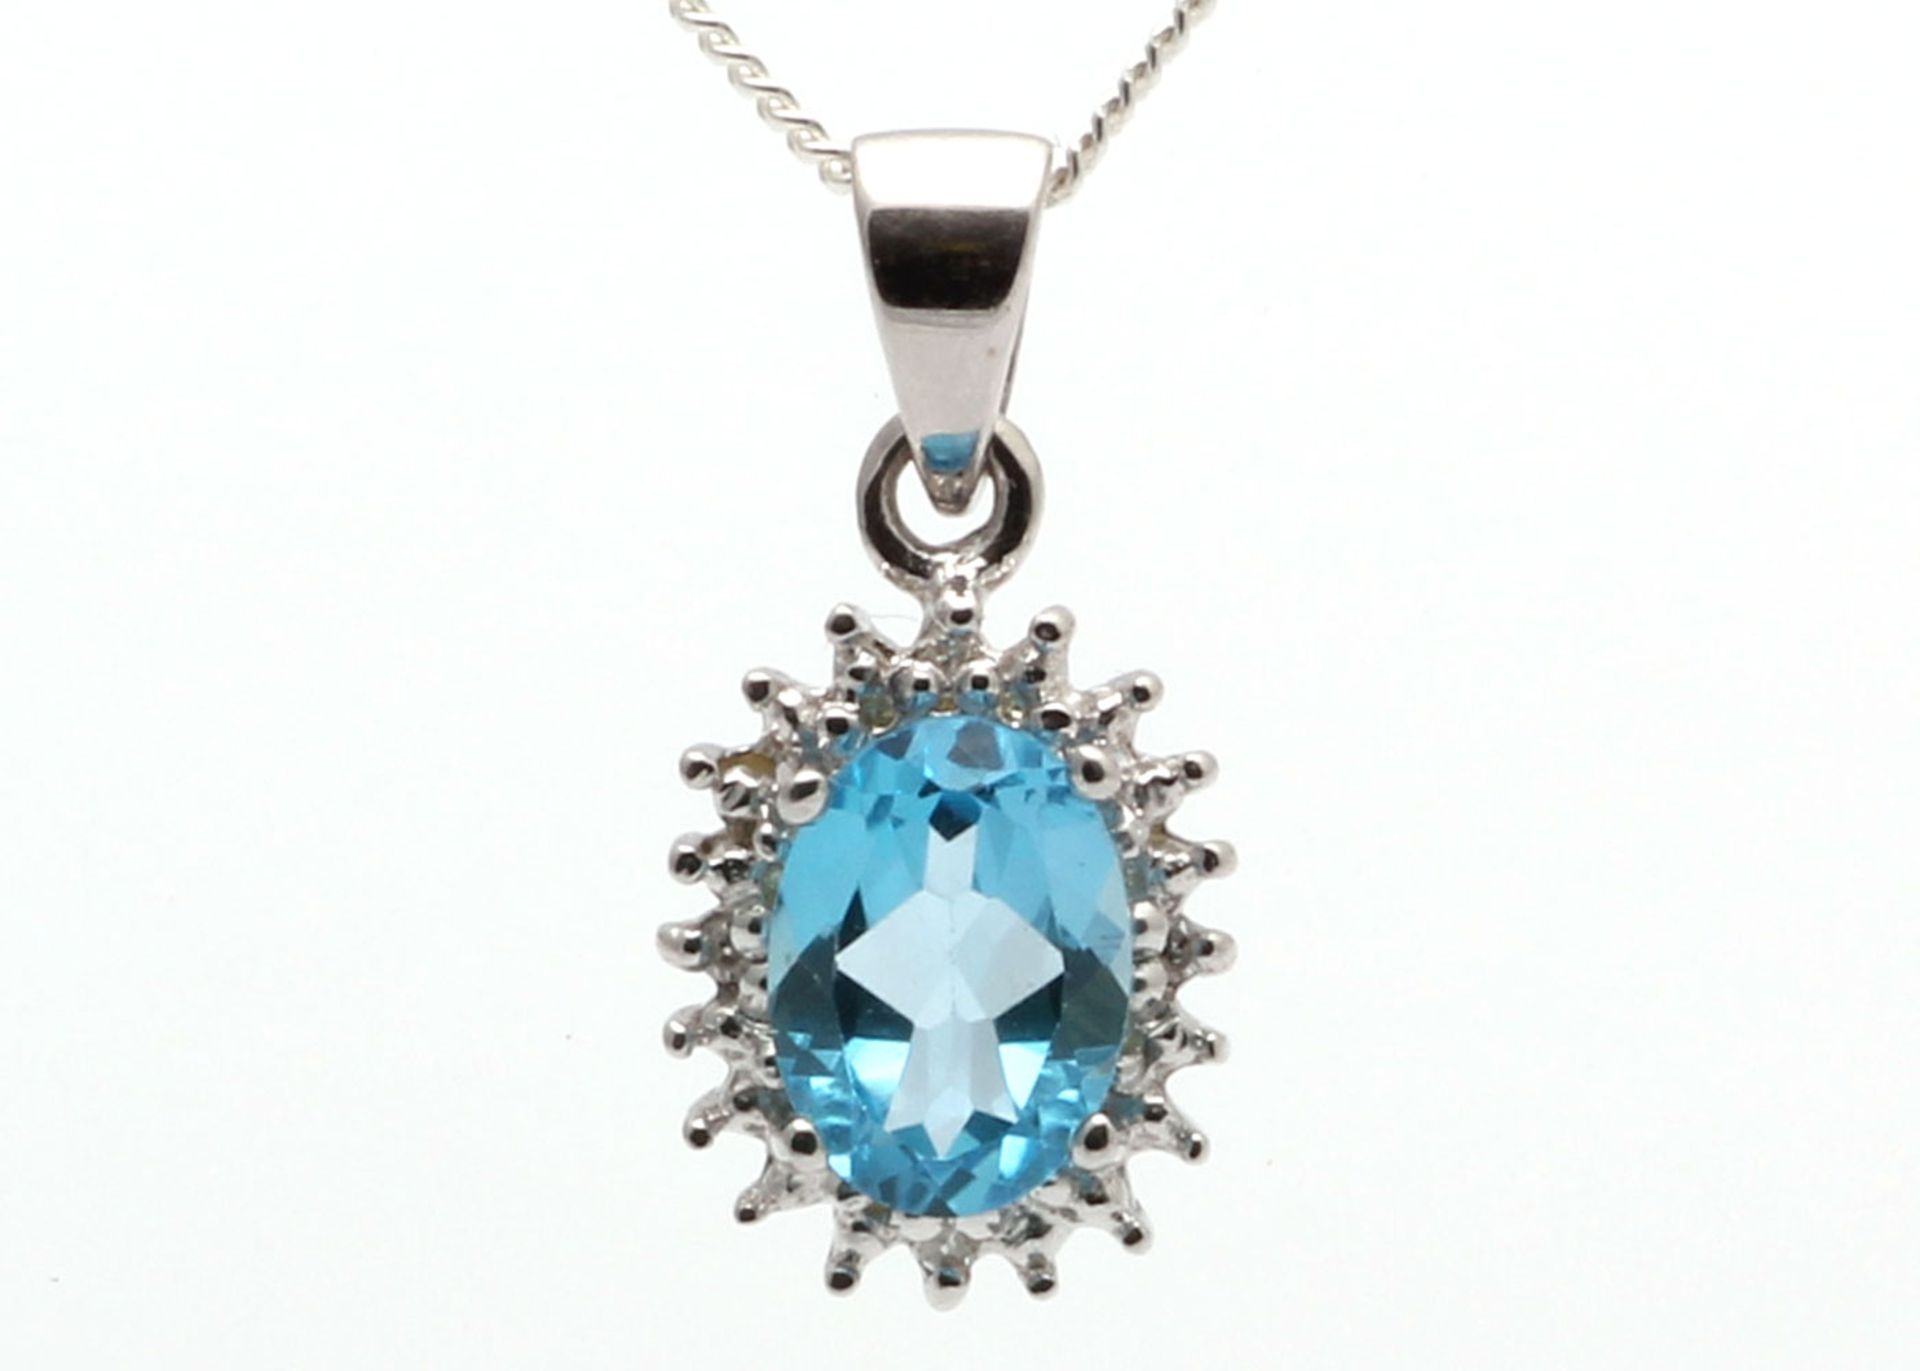 9ct White Gold Diamond And Blue Topaz Pendant 0.01 Carats - Valued by GIE £441.00 - A gorgeous